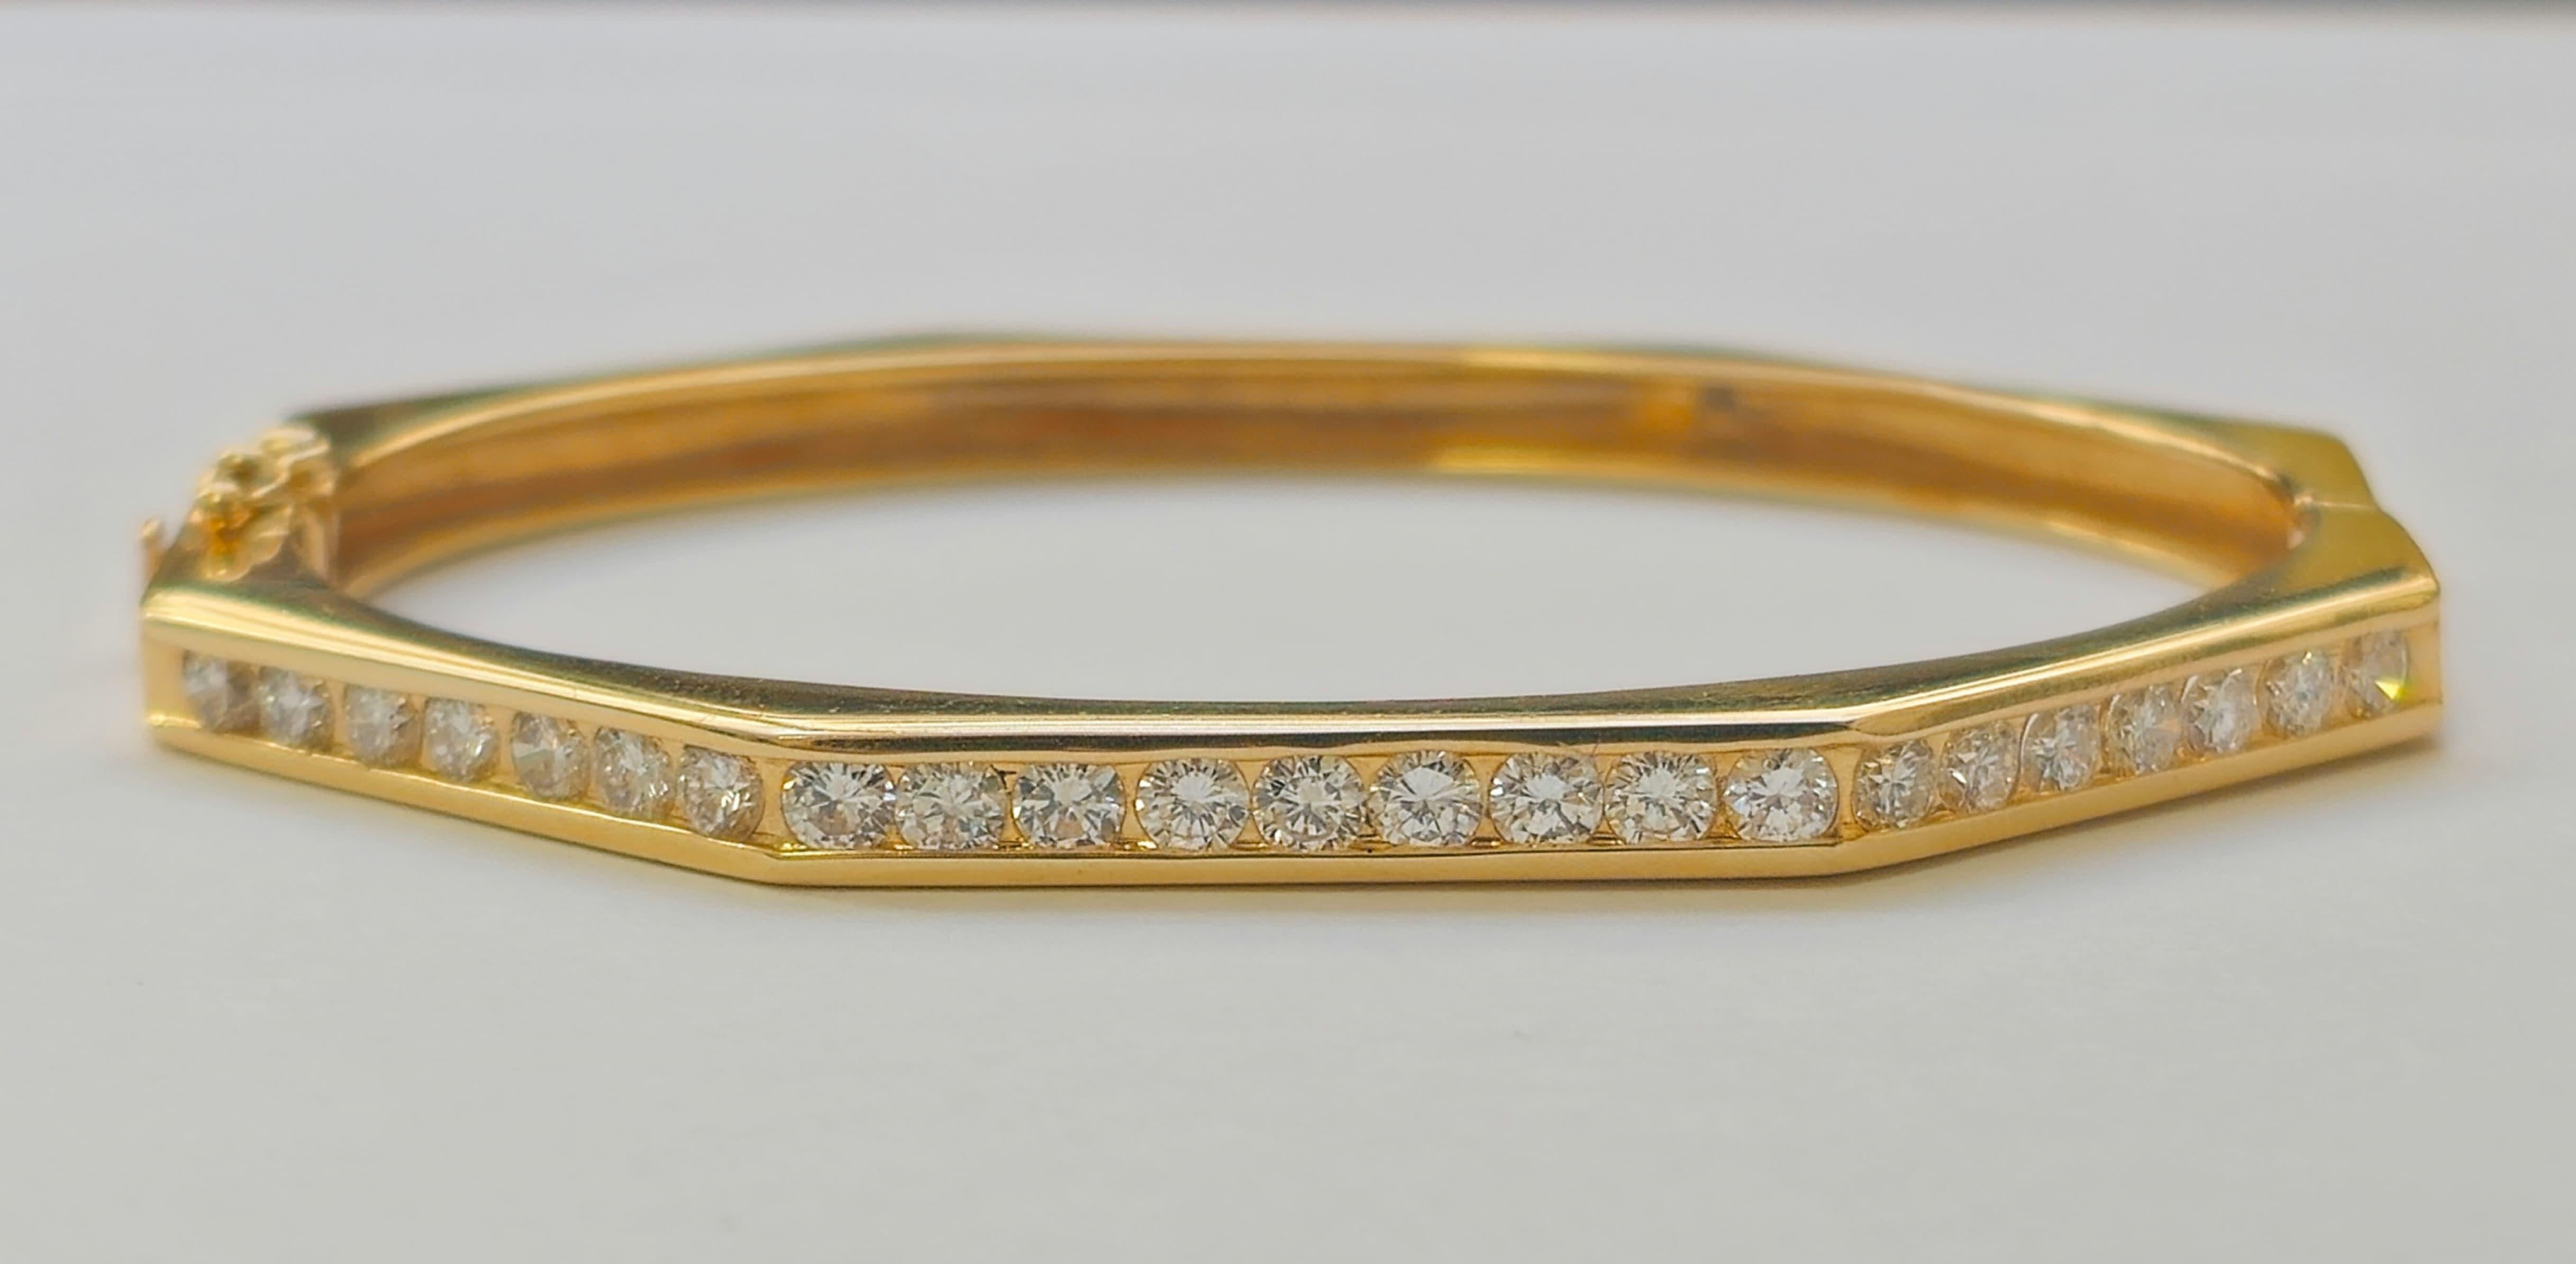 Discover timeless elegance with this 14k gold bracelet, boasting a substantial weight of 18 grams and adorned with 2 carats of diamonds. This versatile piece is in good condition and can comfortably fit a wrist size of 7-8 inches. The diamonds are